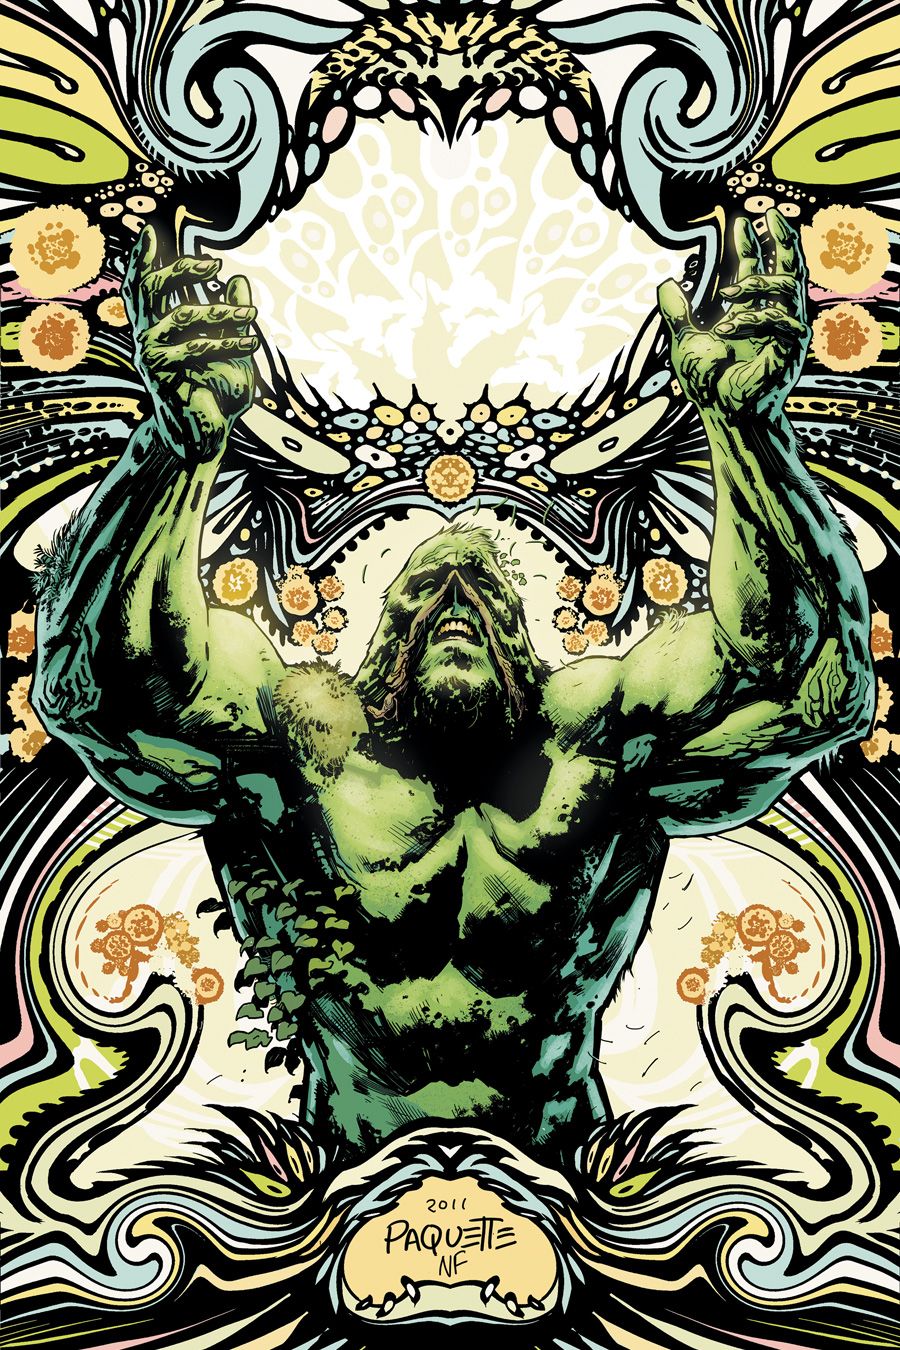 People, I give you, Swamp Jesus! A review of Swamp Thing